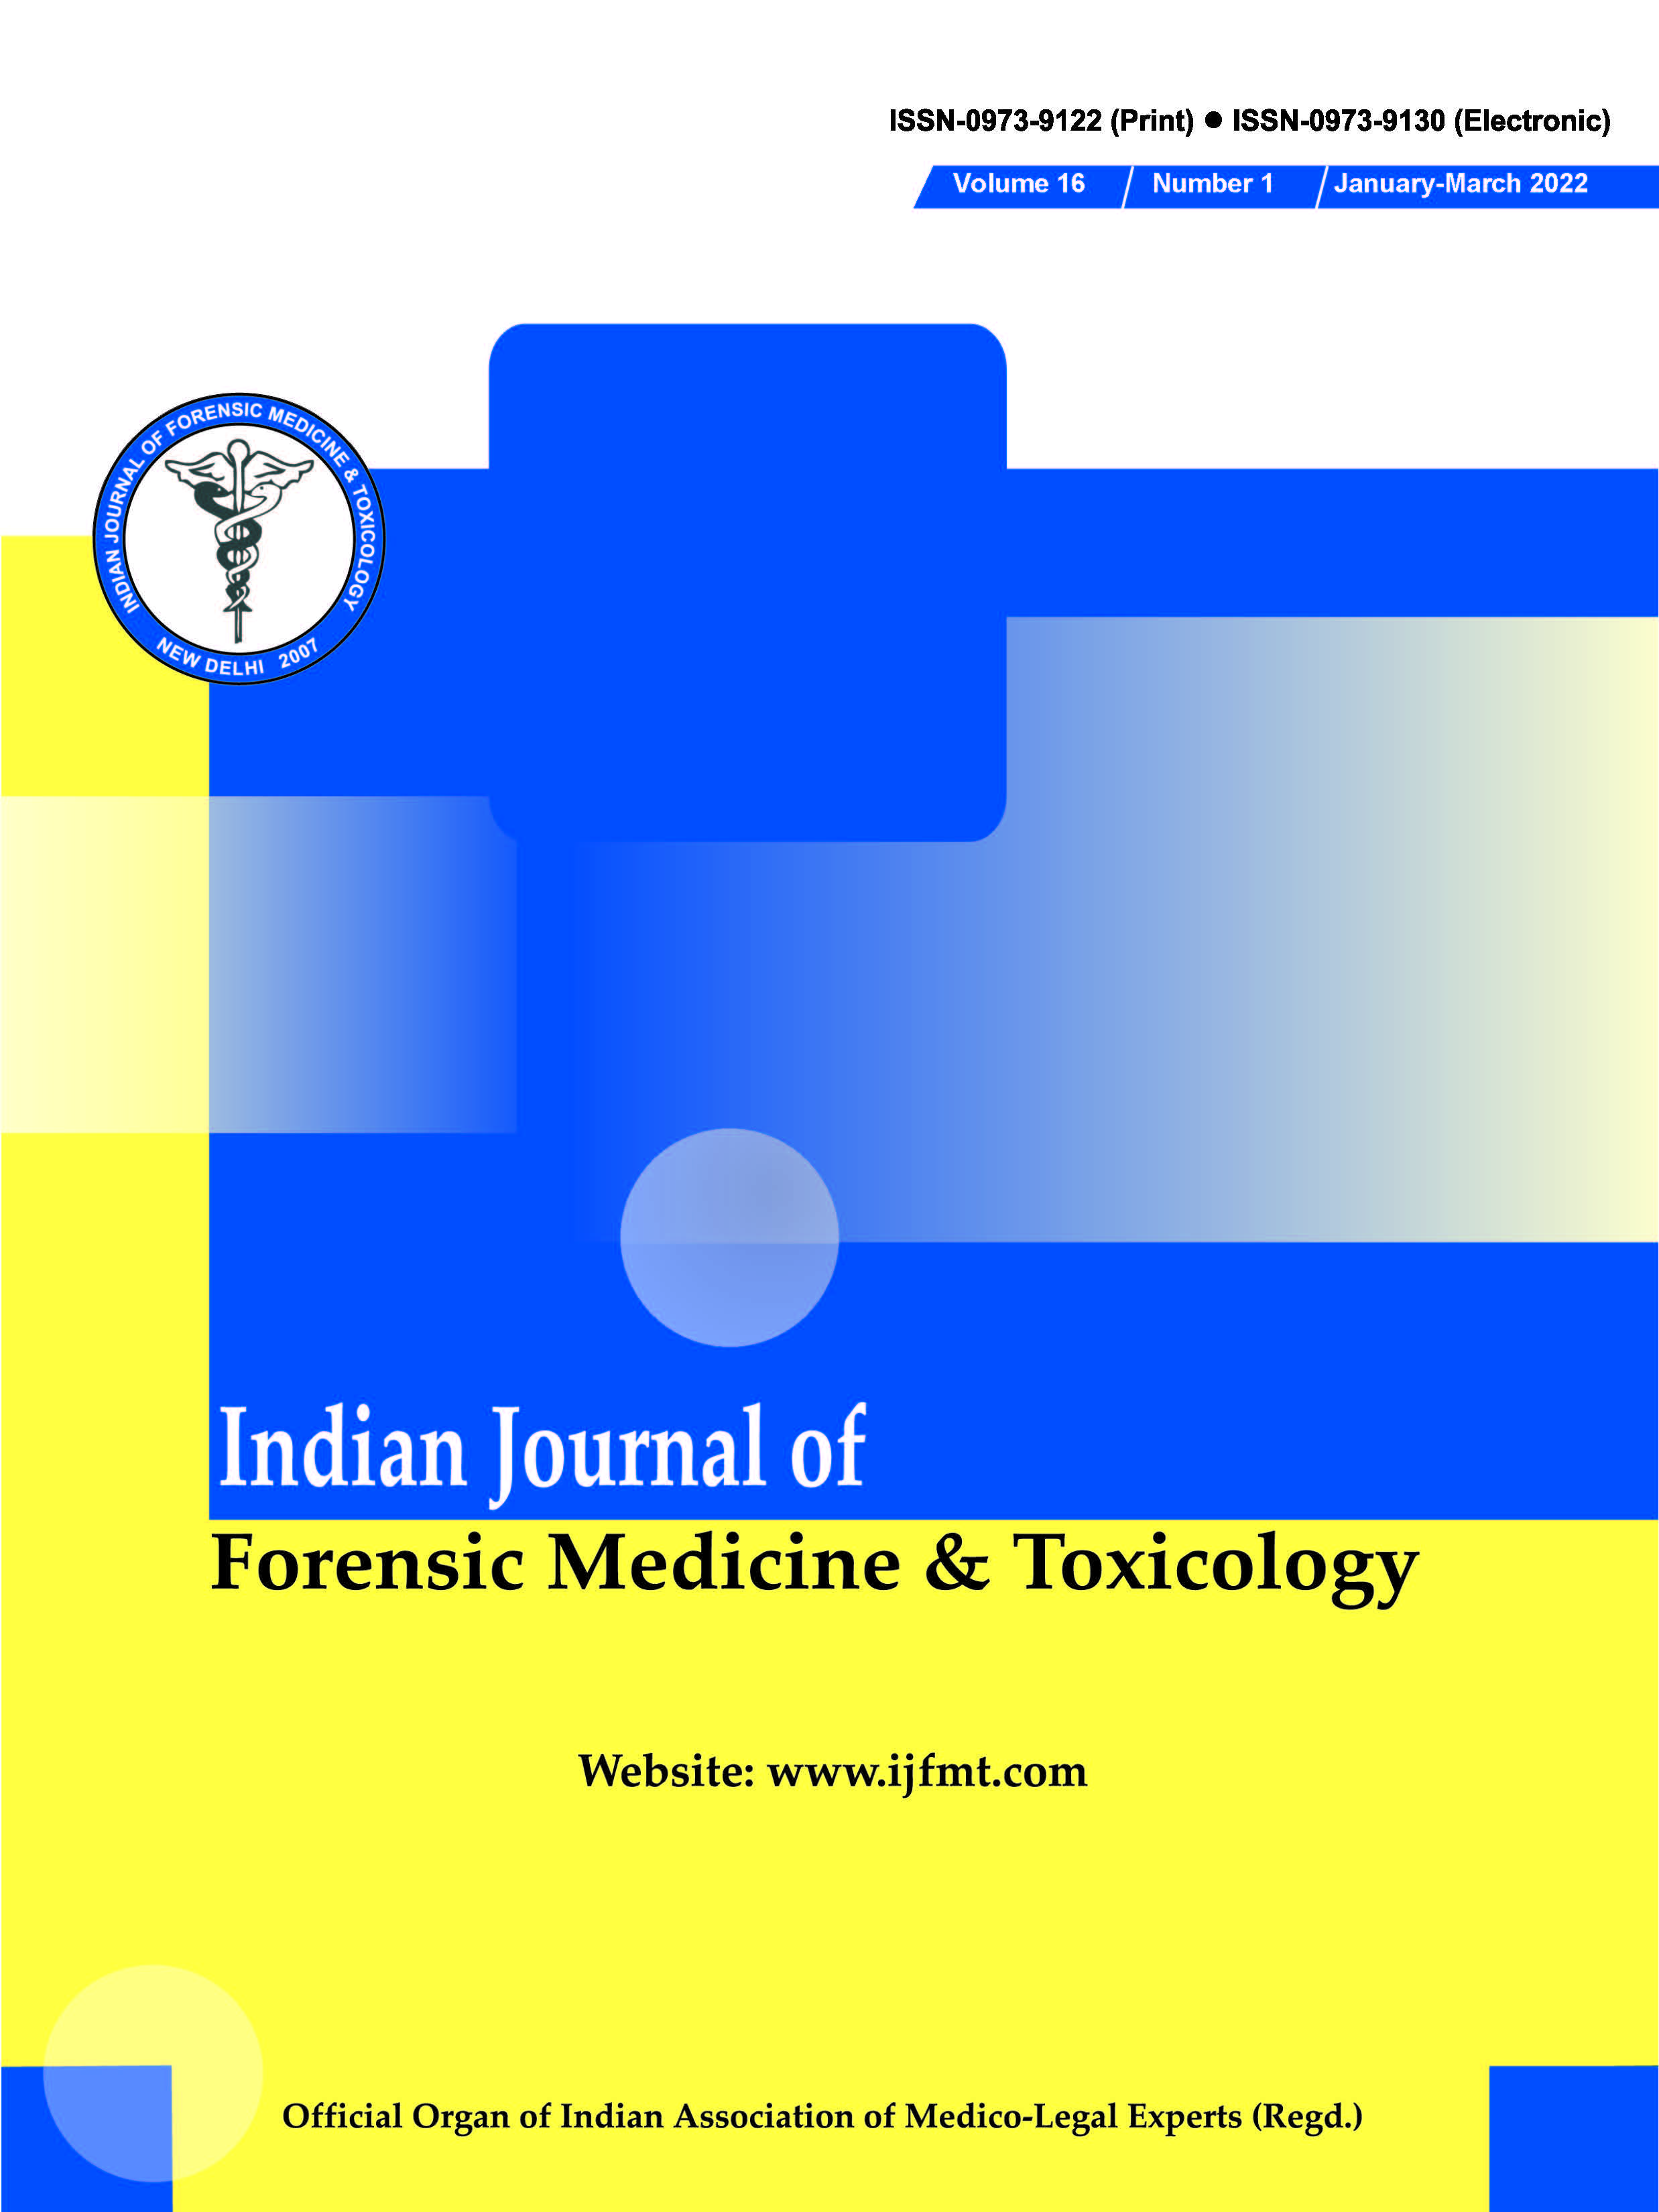 					View Vol. 16 No. 1 (2022): Indian Journal of Forensic Medicine & Toxicology
				